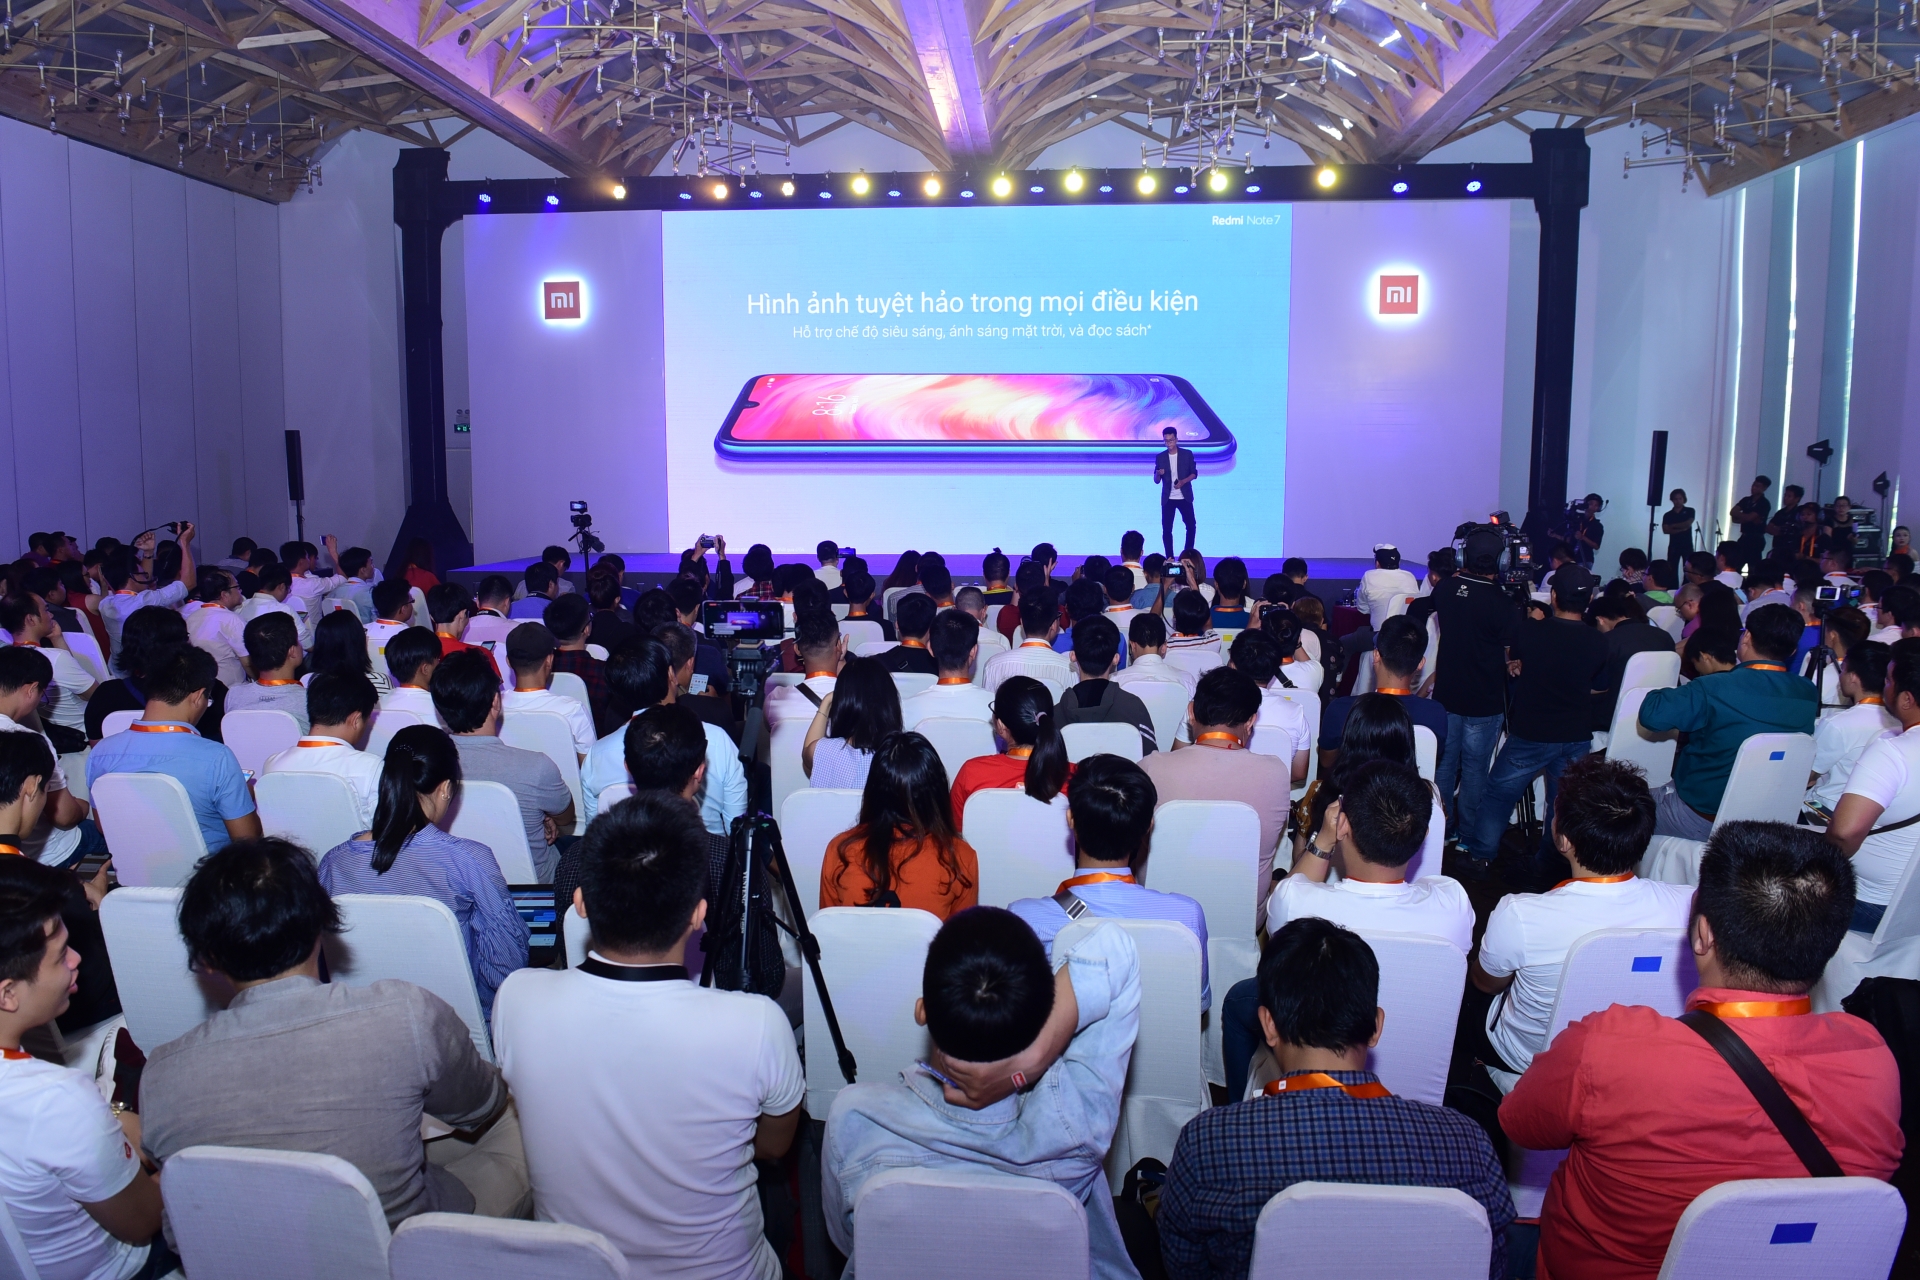 Chinese smartphone players quickly gain ground in Vietnam